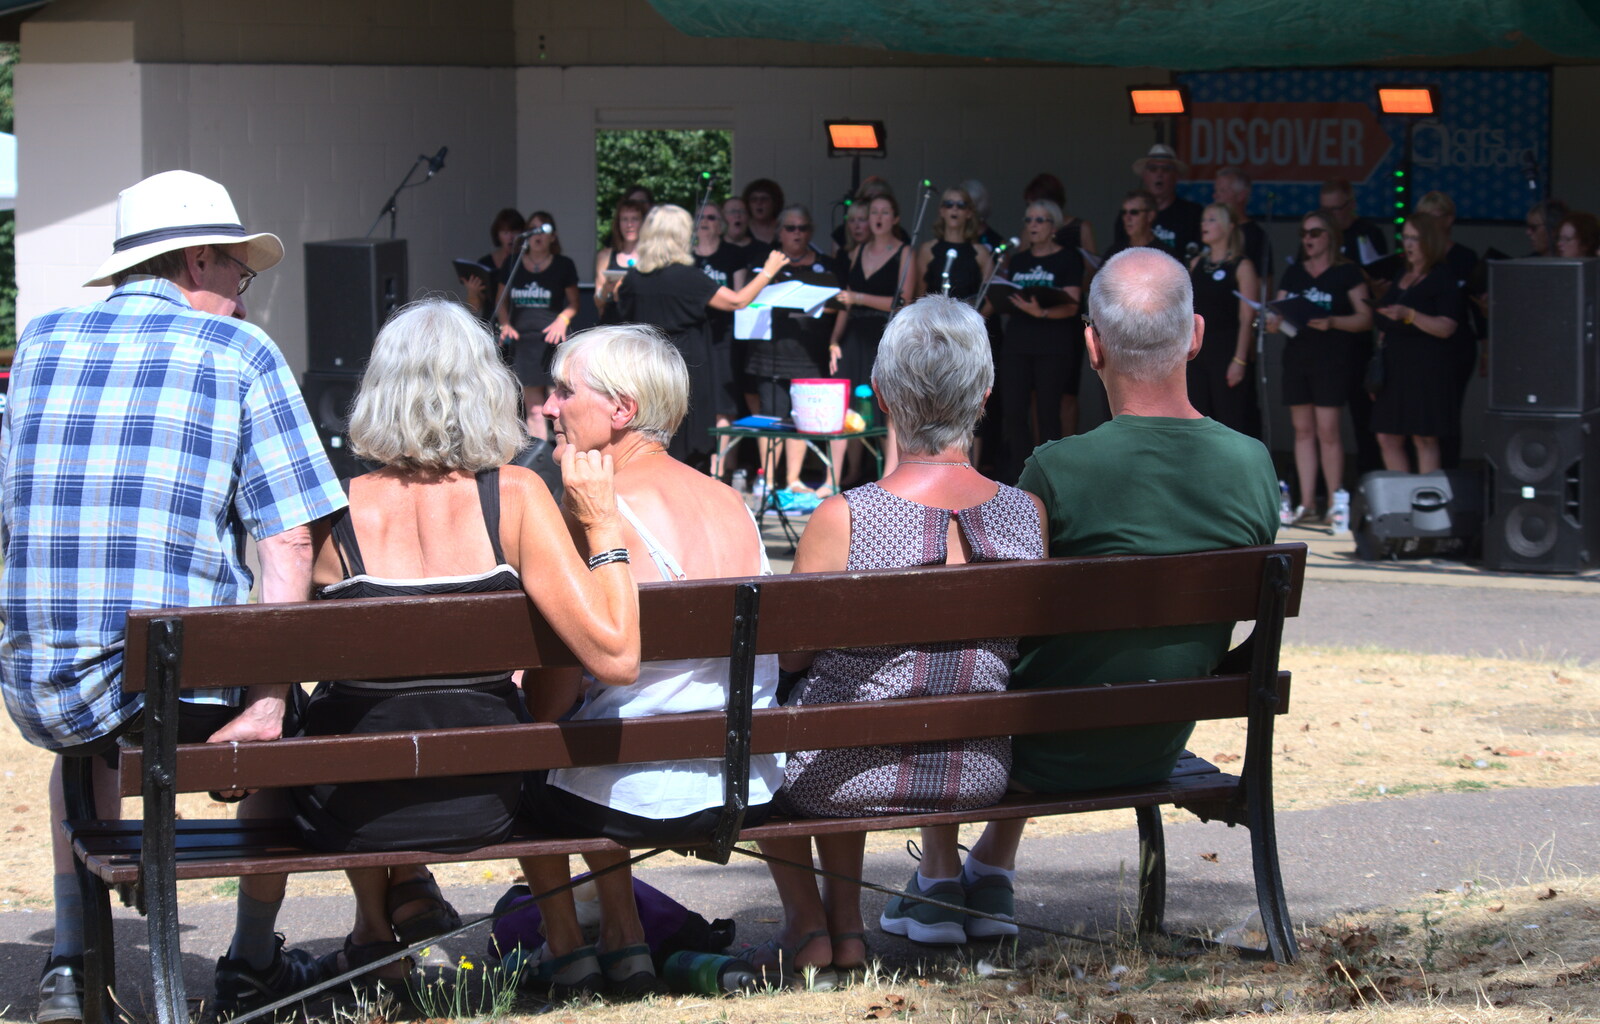 A bench full of audience from Diss Fest, The Park, Diss, Norfolk - 22nd July 2018